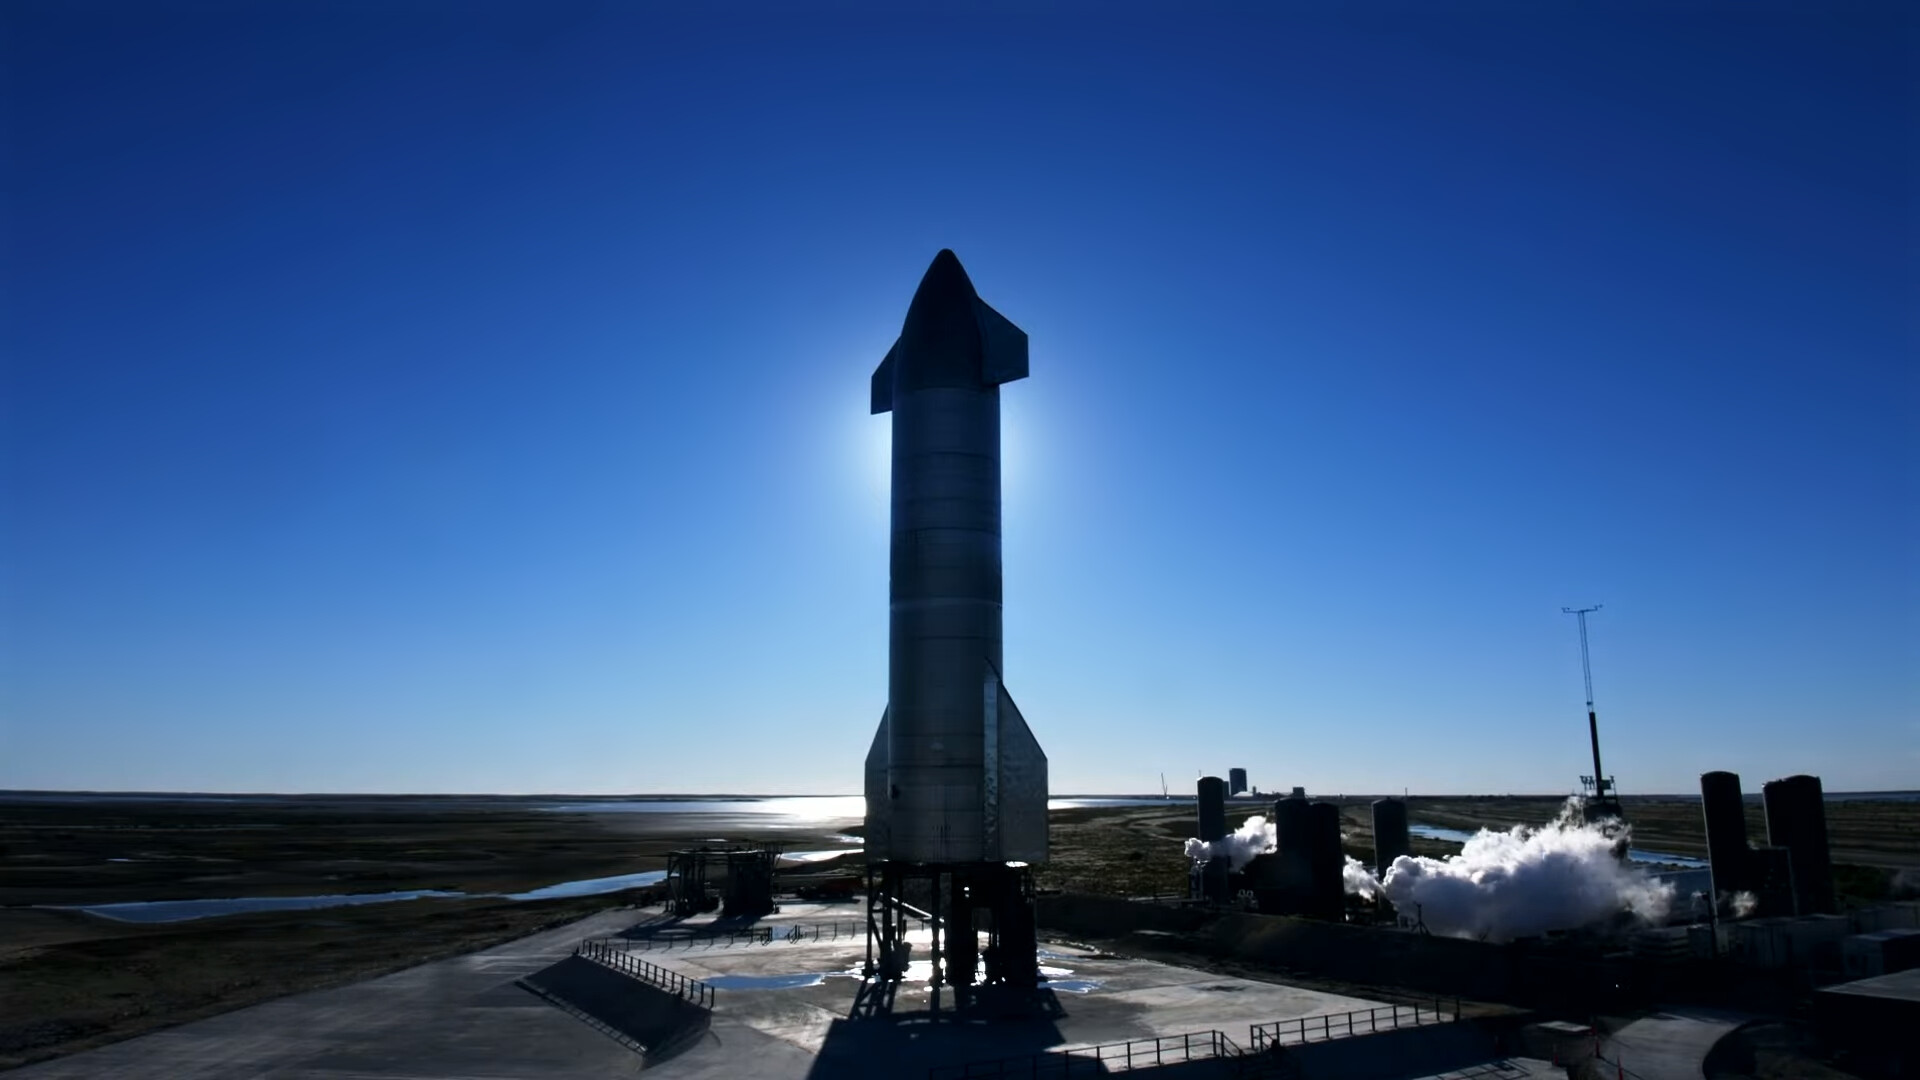 SpaceX: Starship SN8, A fully reusable, super heavy-lift launch vehicle. 1920x1080 Full HD Wallpaper.